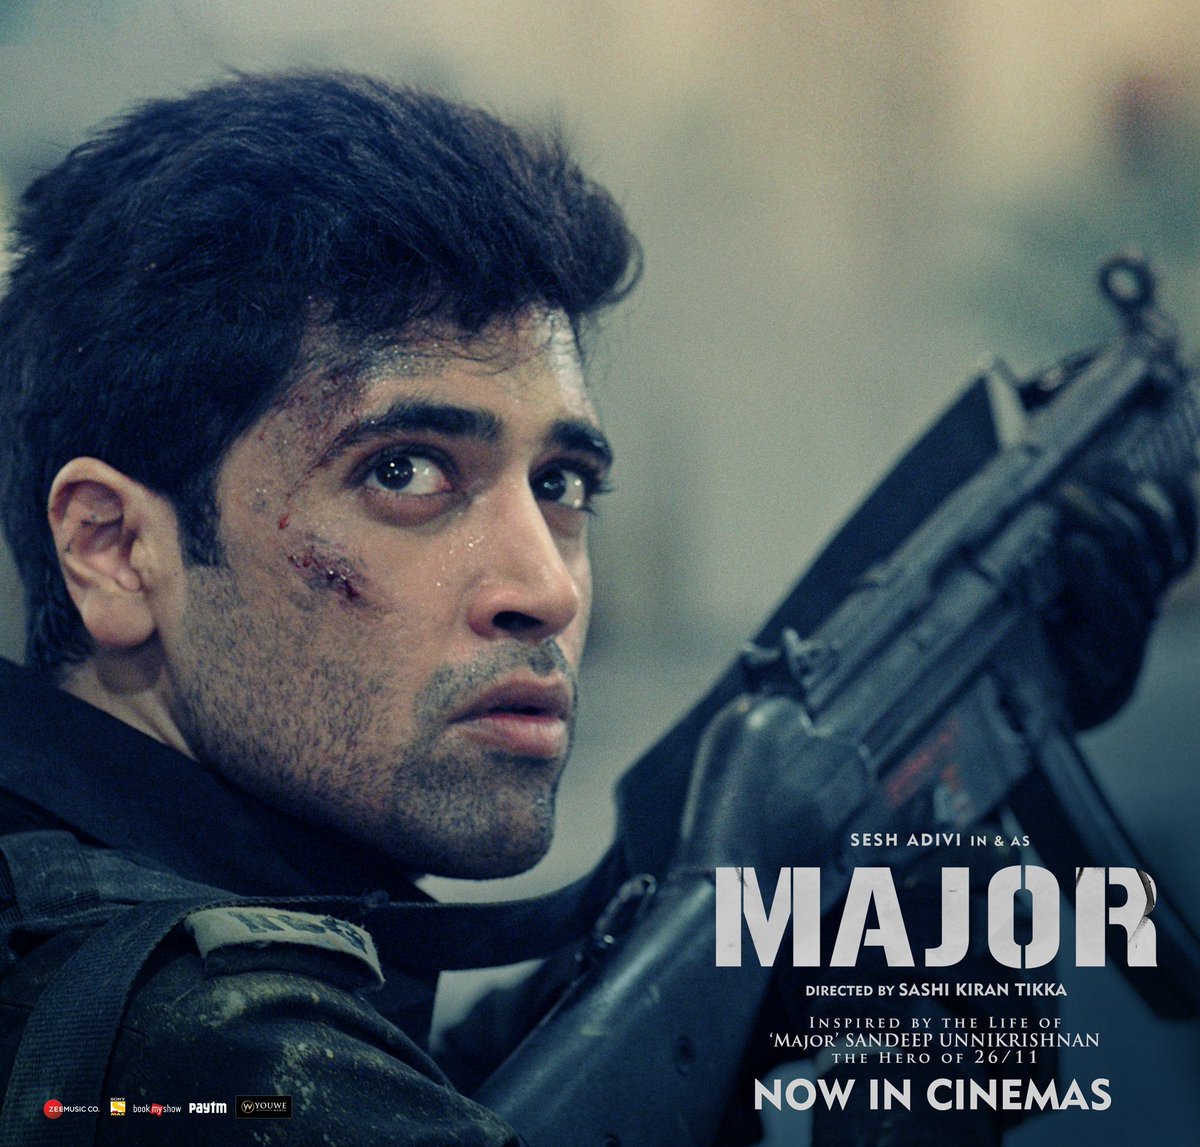 Finally watched #MajorTheFilm 
Must know about the legend #SandeepUnnikrishnan his sacrifice...
No one else could have pulled this role better than @AdiviSesh 
Uncanny similar looks...